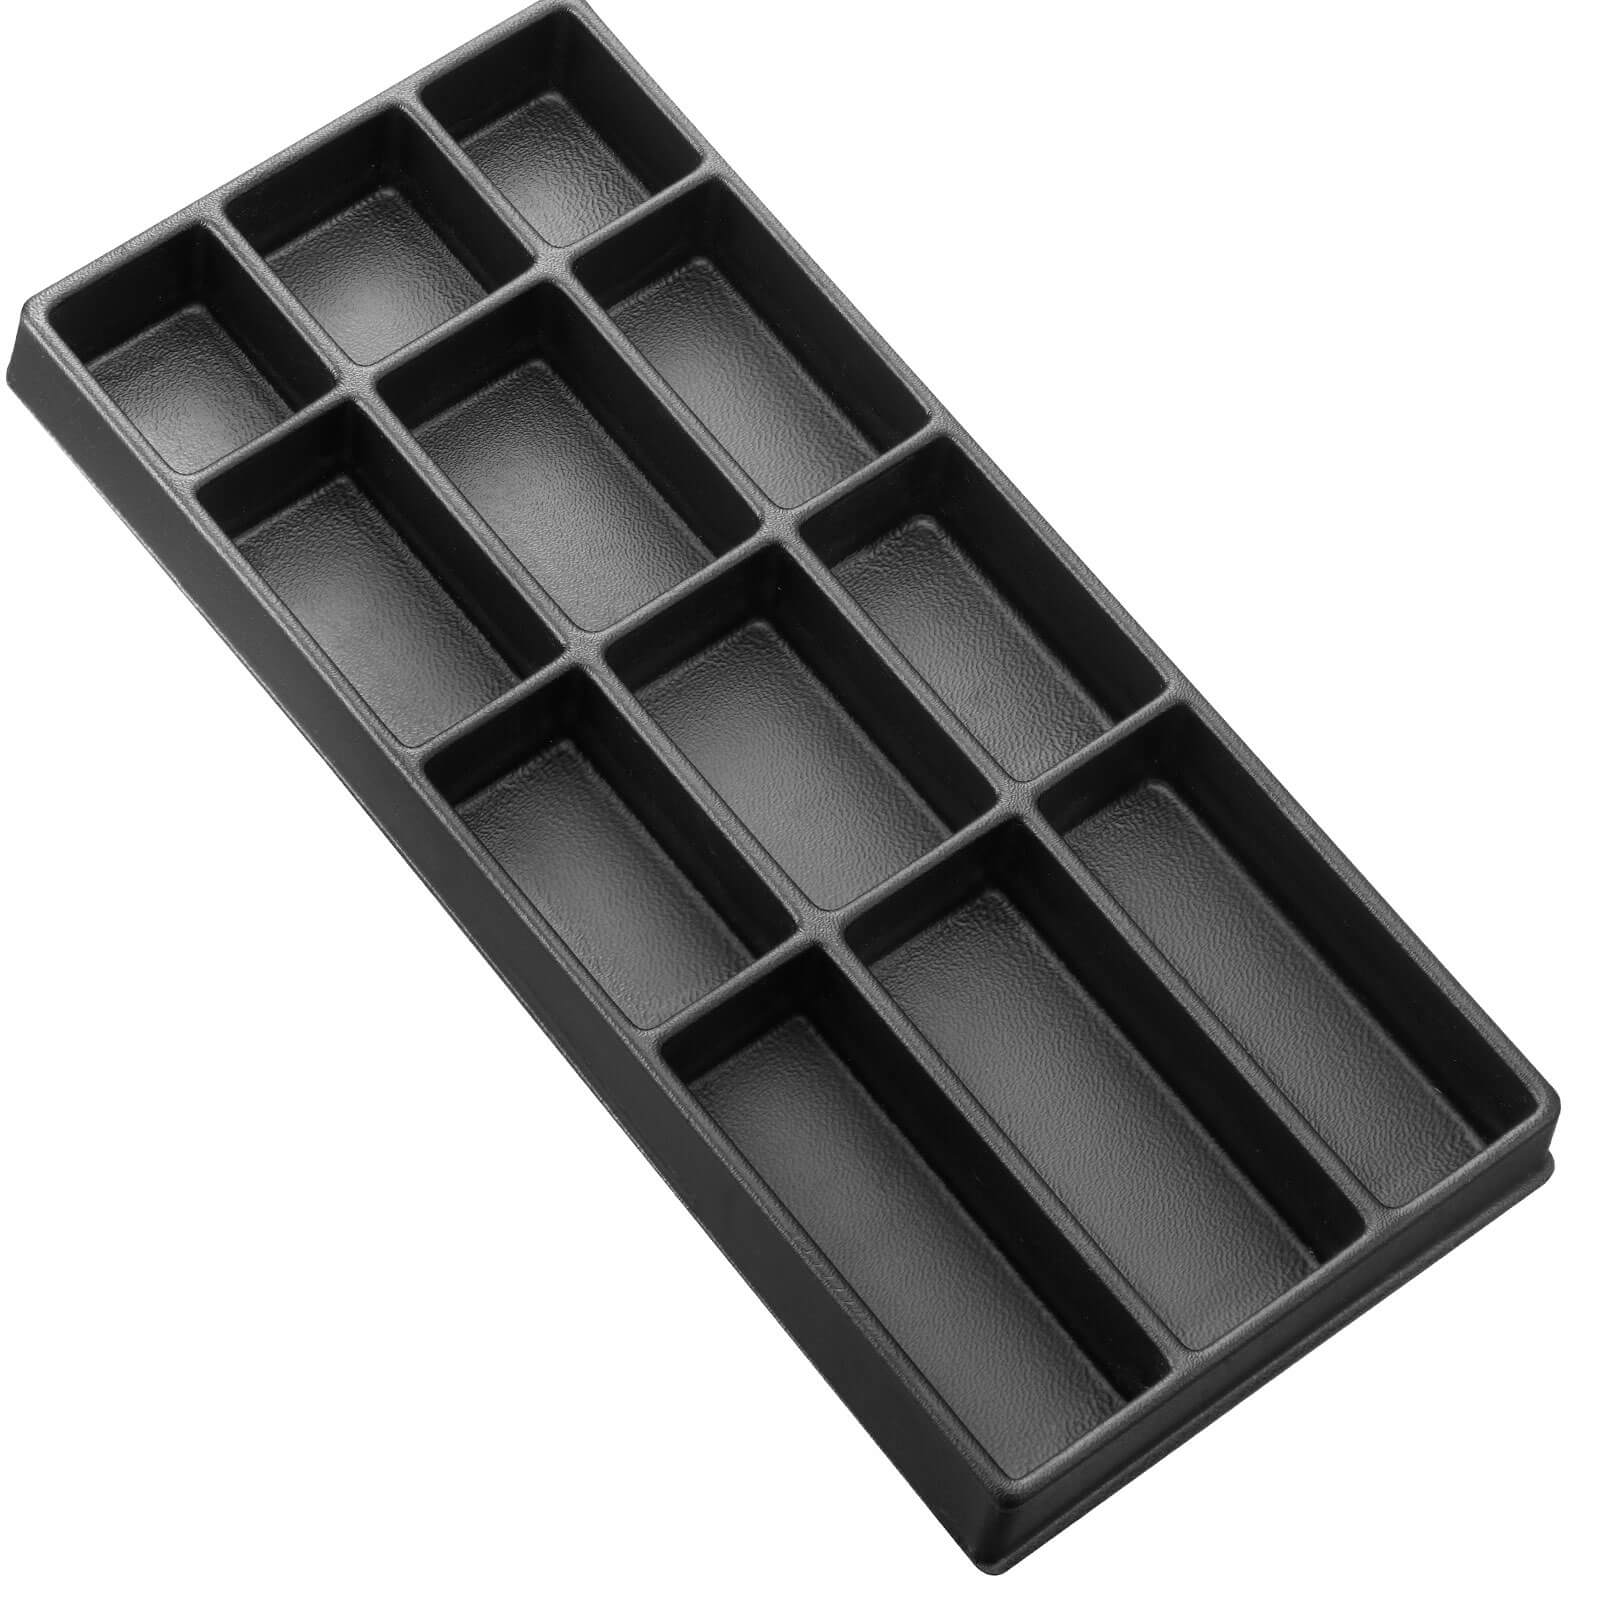 Photo of Expert By Facom Organiser Module Tray For Roller Cabinets And Tool Chests